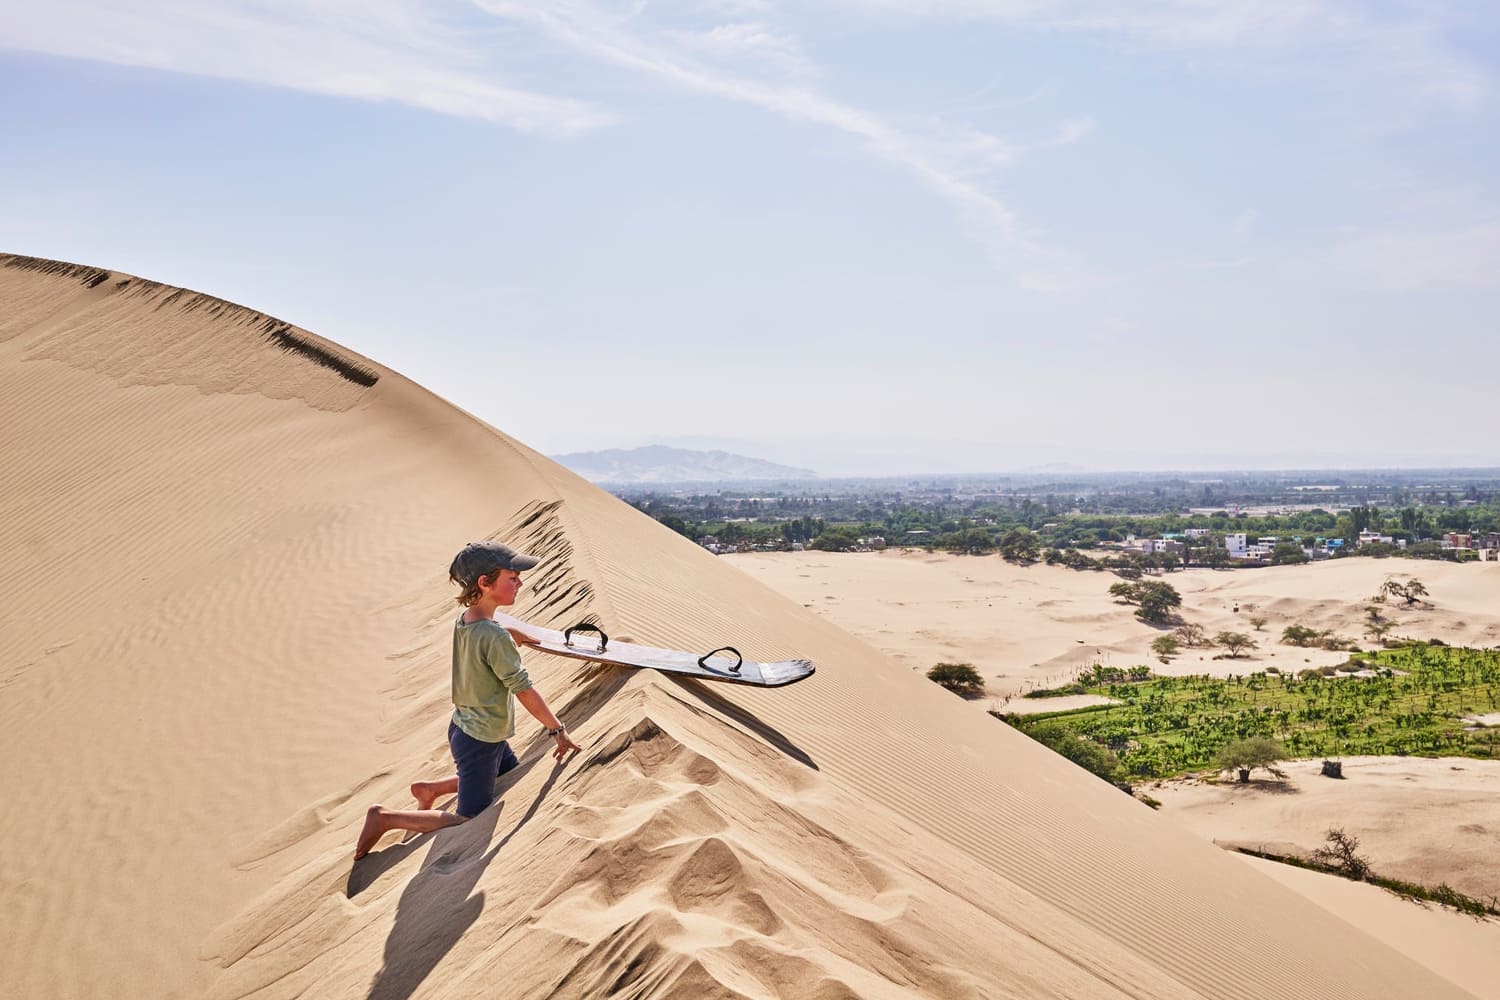 HISTORY OF THE HUACACHINA OASIS